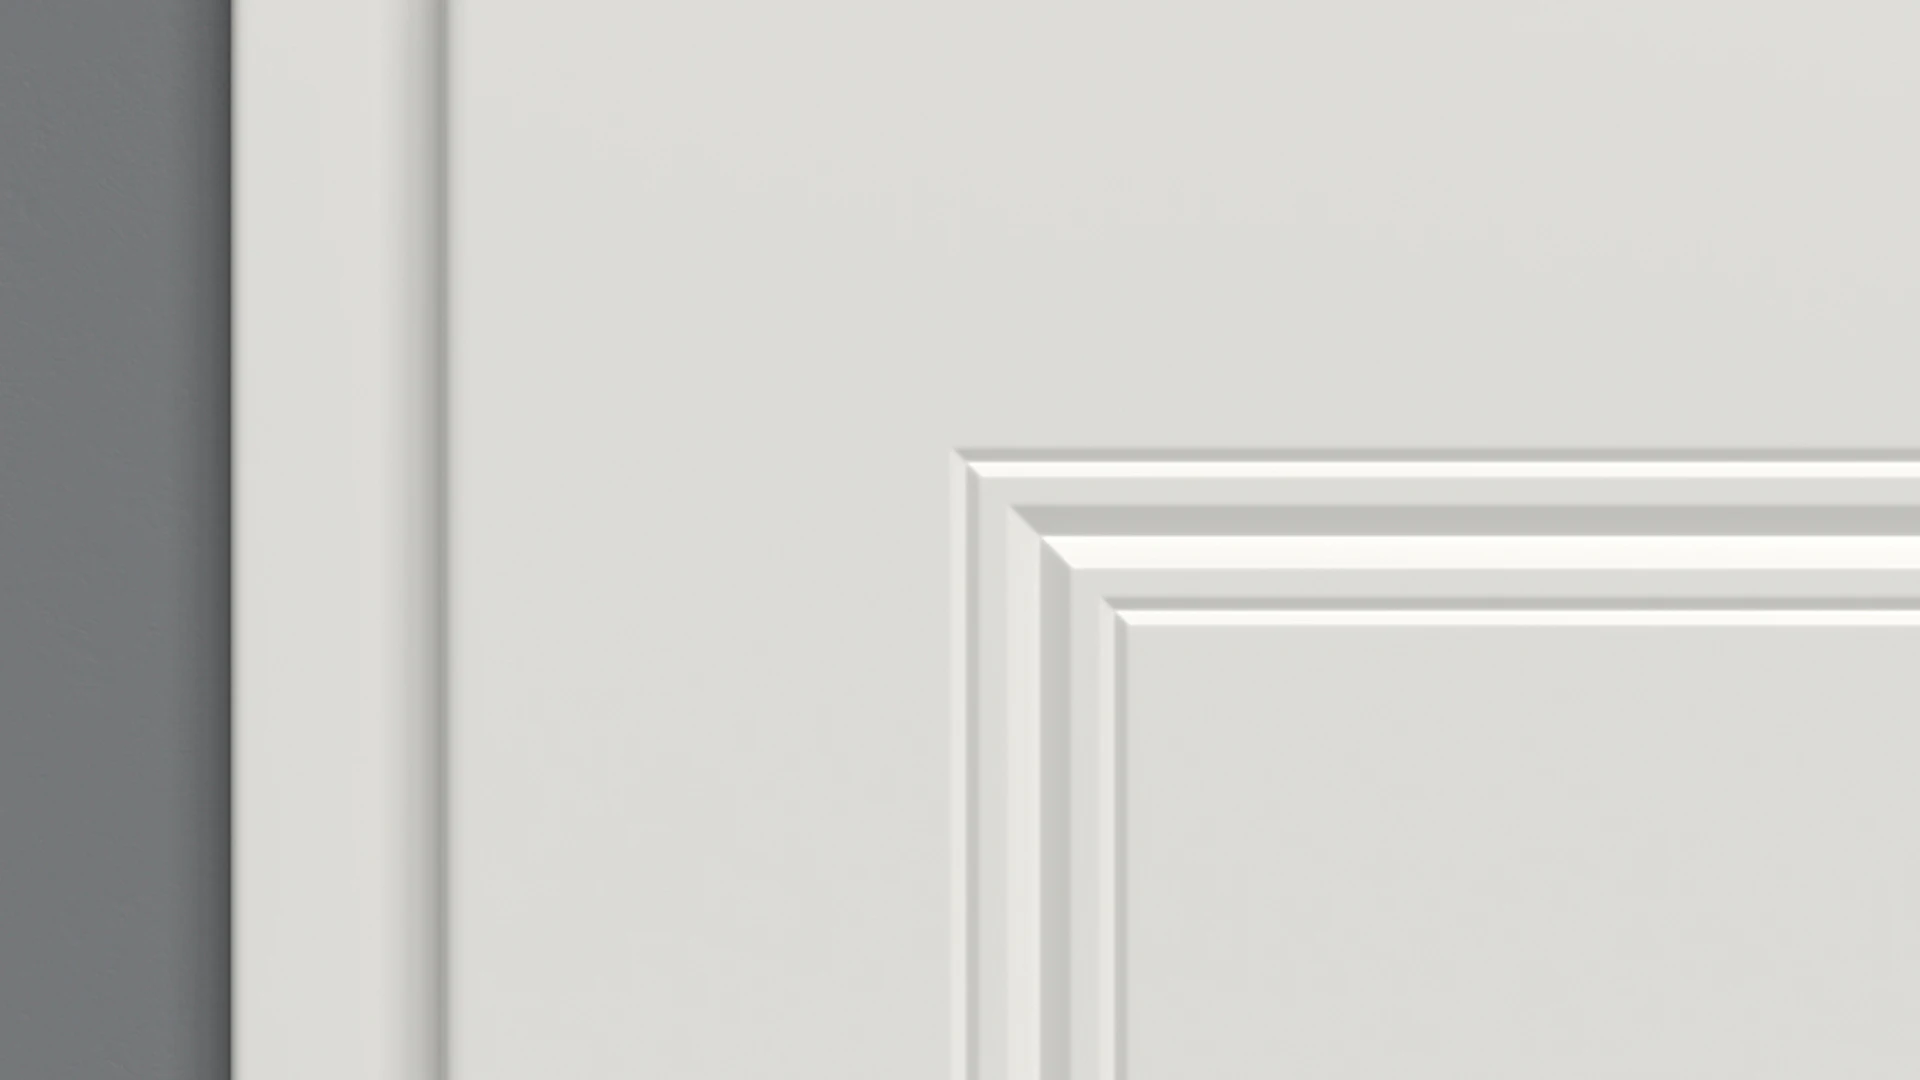 planeo interior door lacquer 2.0 - Aiko 9016 white lacquer 1985 x 735 mm DIN R - round RSP hinge 3-t